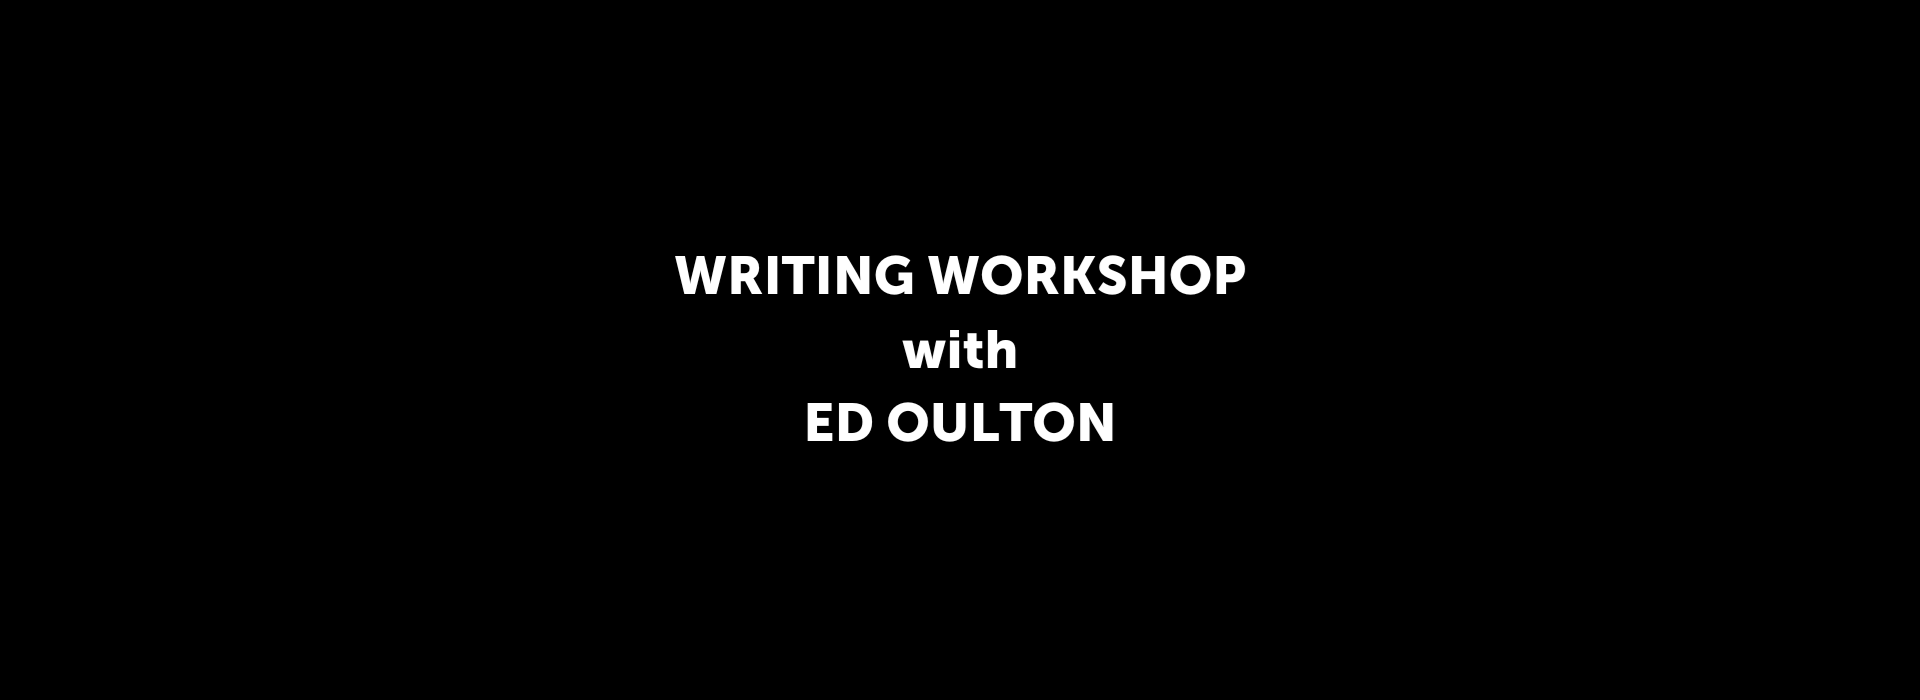 Writing Workshop with Ed Oulton